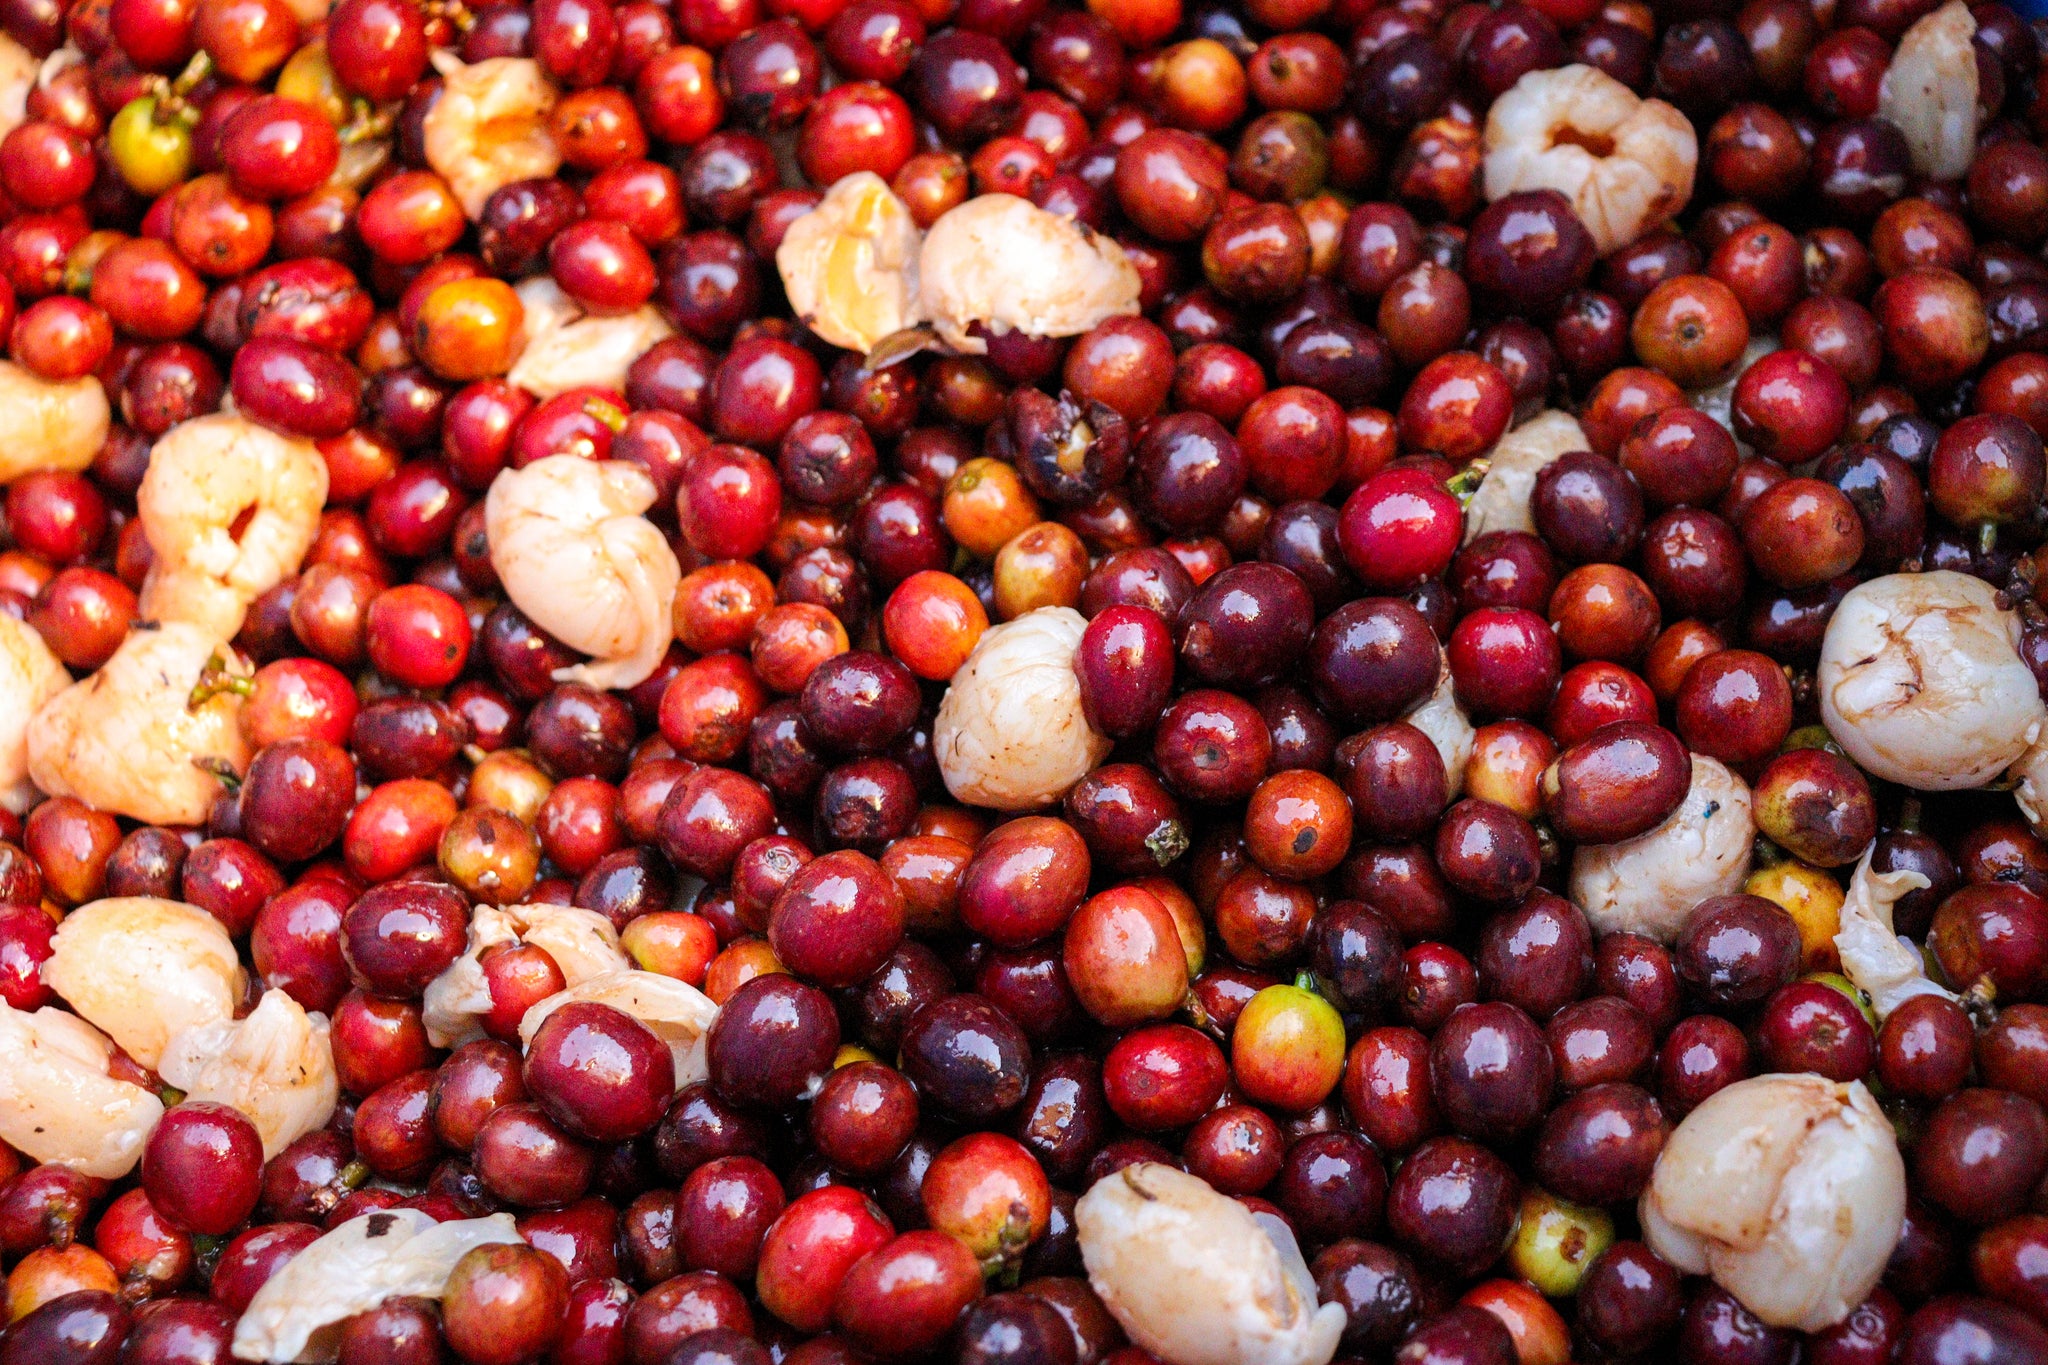 coffee co-fermentation process with lychee fruit